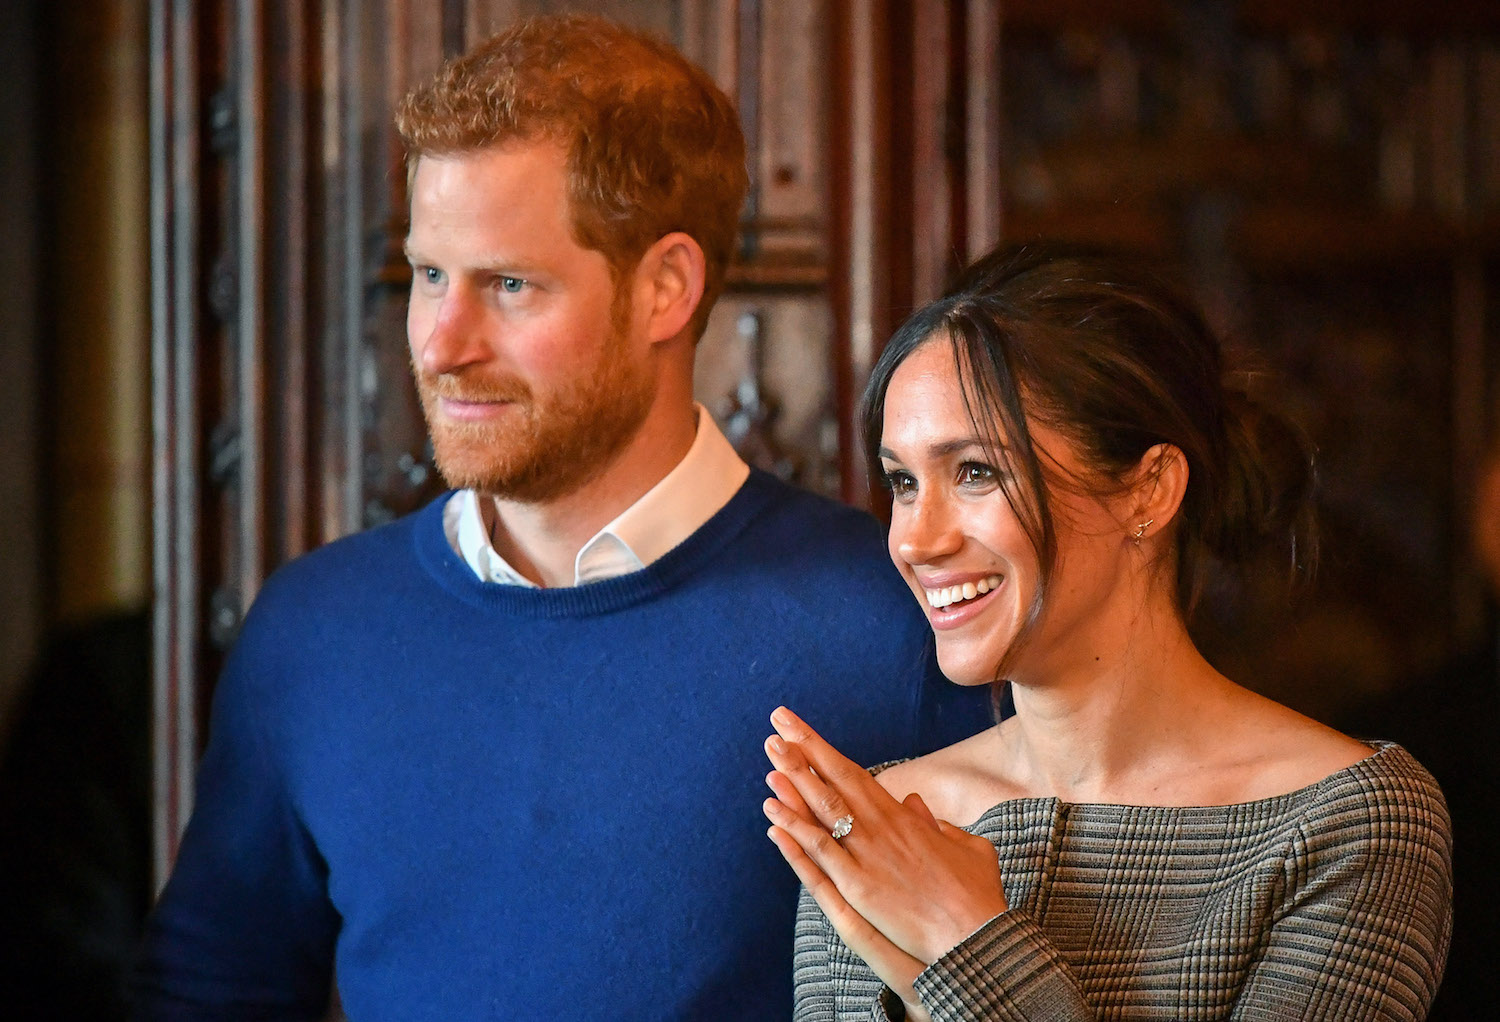 This Is Exactly How The Royals Spend Their Christmas Day